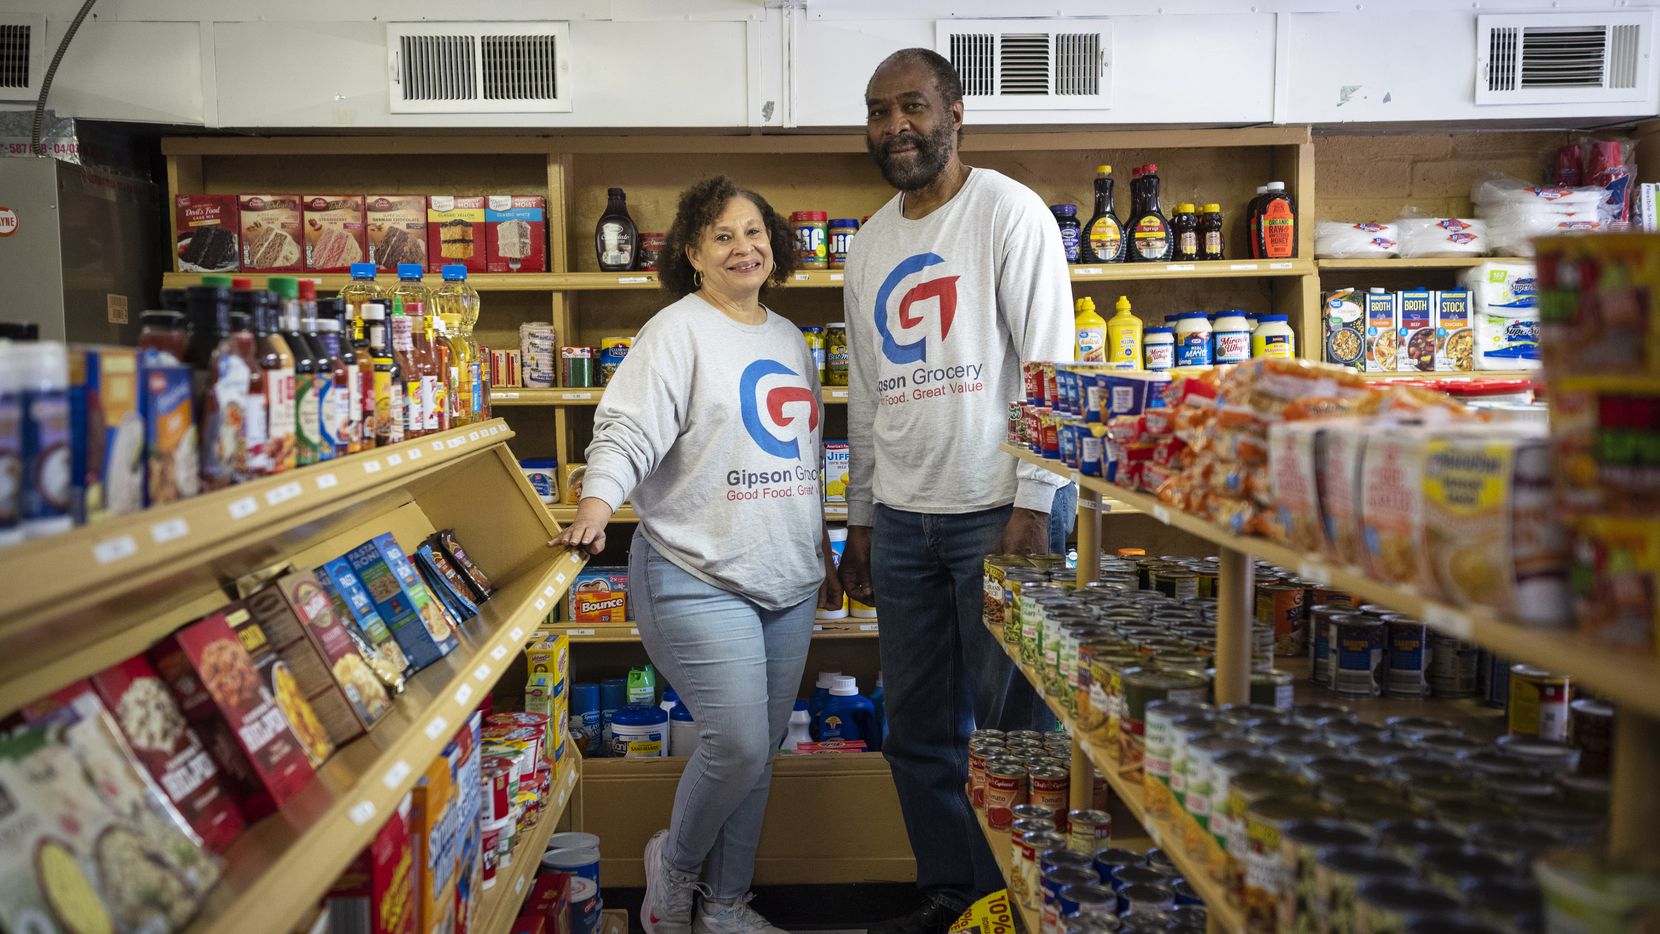 Co-owners Jonnie Gipson and Phillip Gipson stand inside their business Gipson Grocery in Dallas. The small neighborhood grocery store is one of the longest-running Black-owned grocery stores in North Texas and the nation.